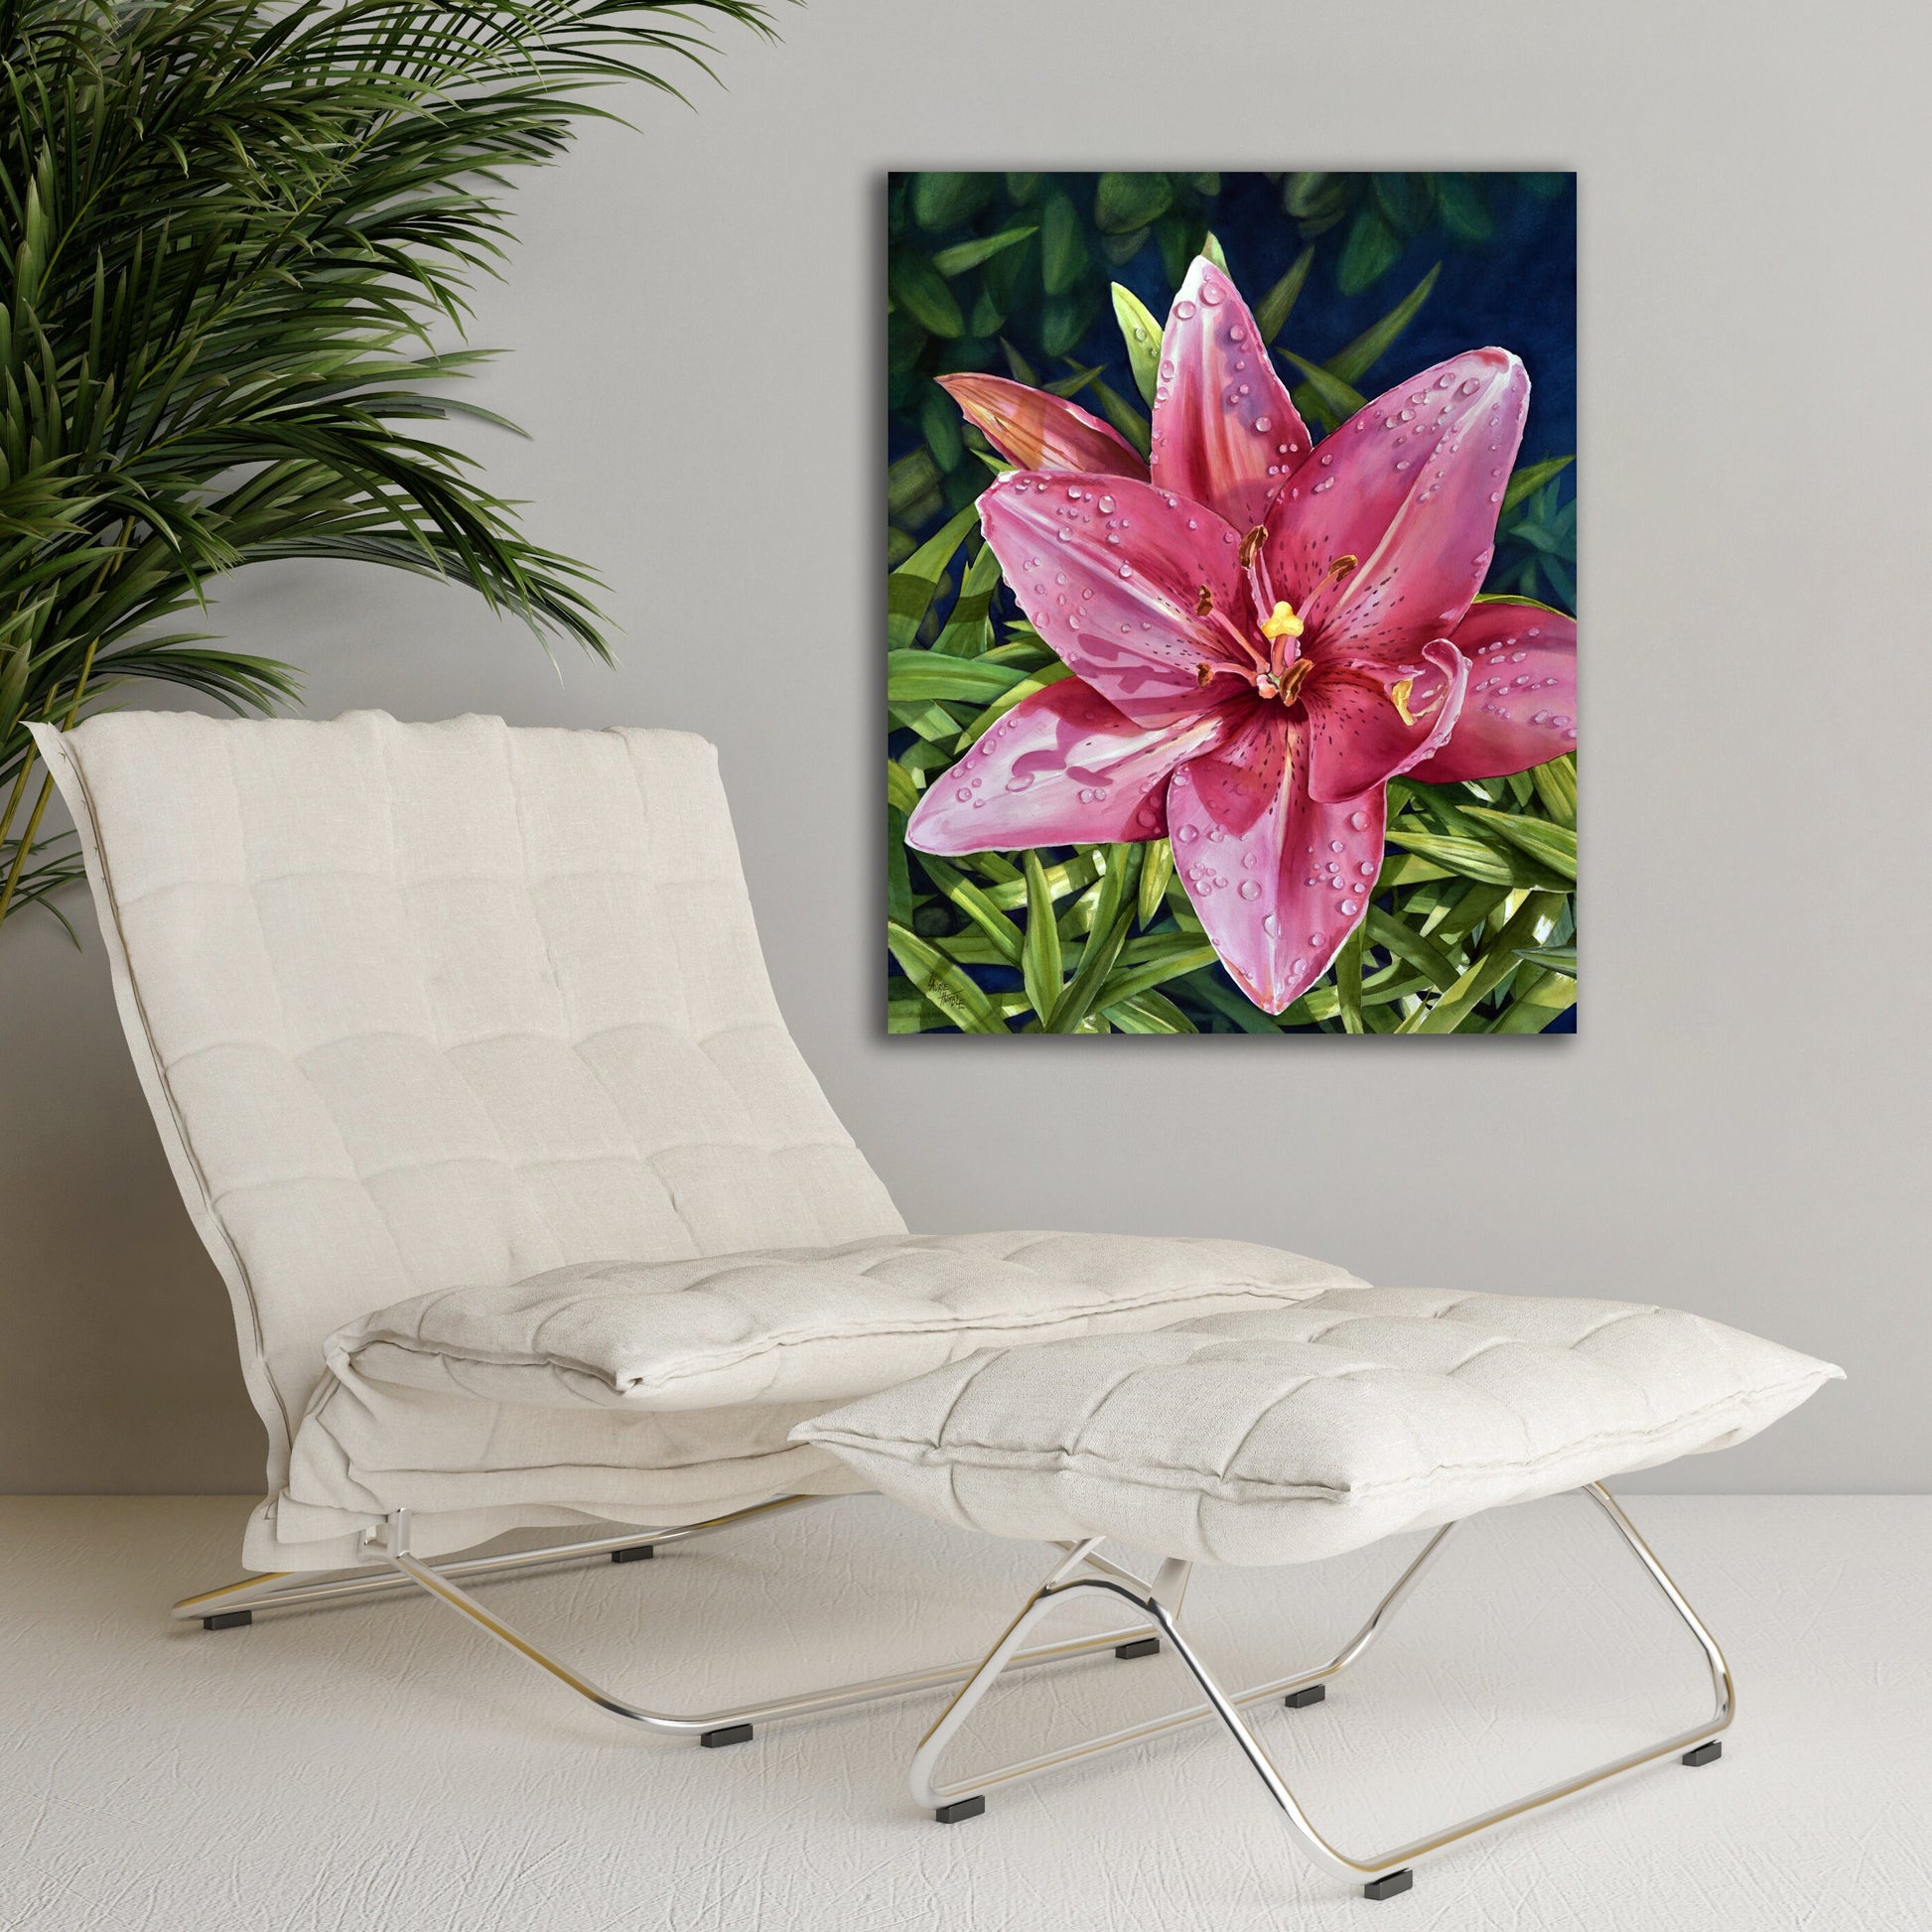 Wall Mural pink lily flower 